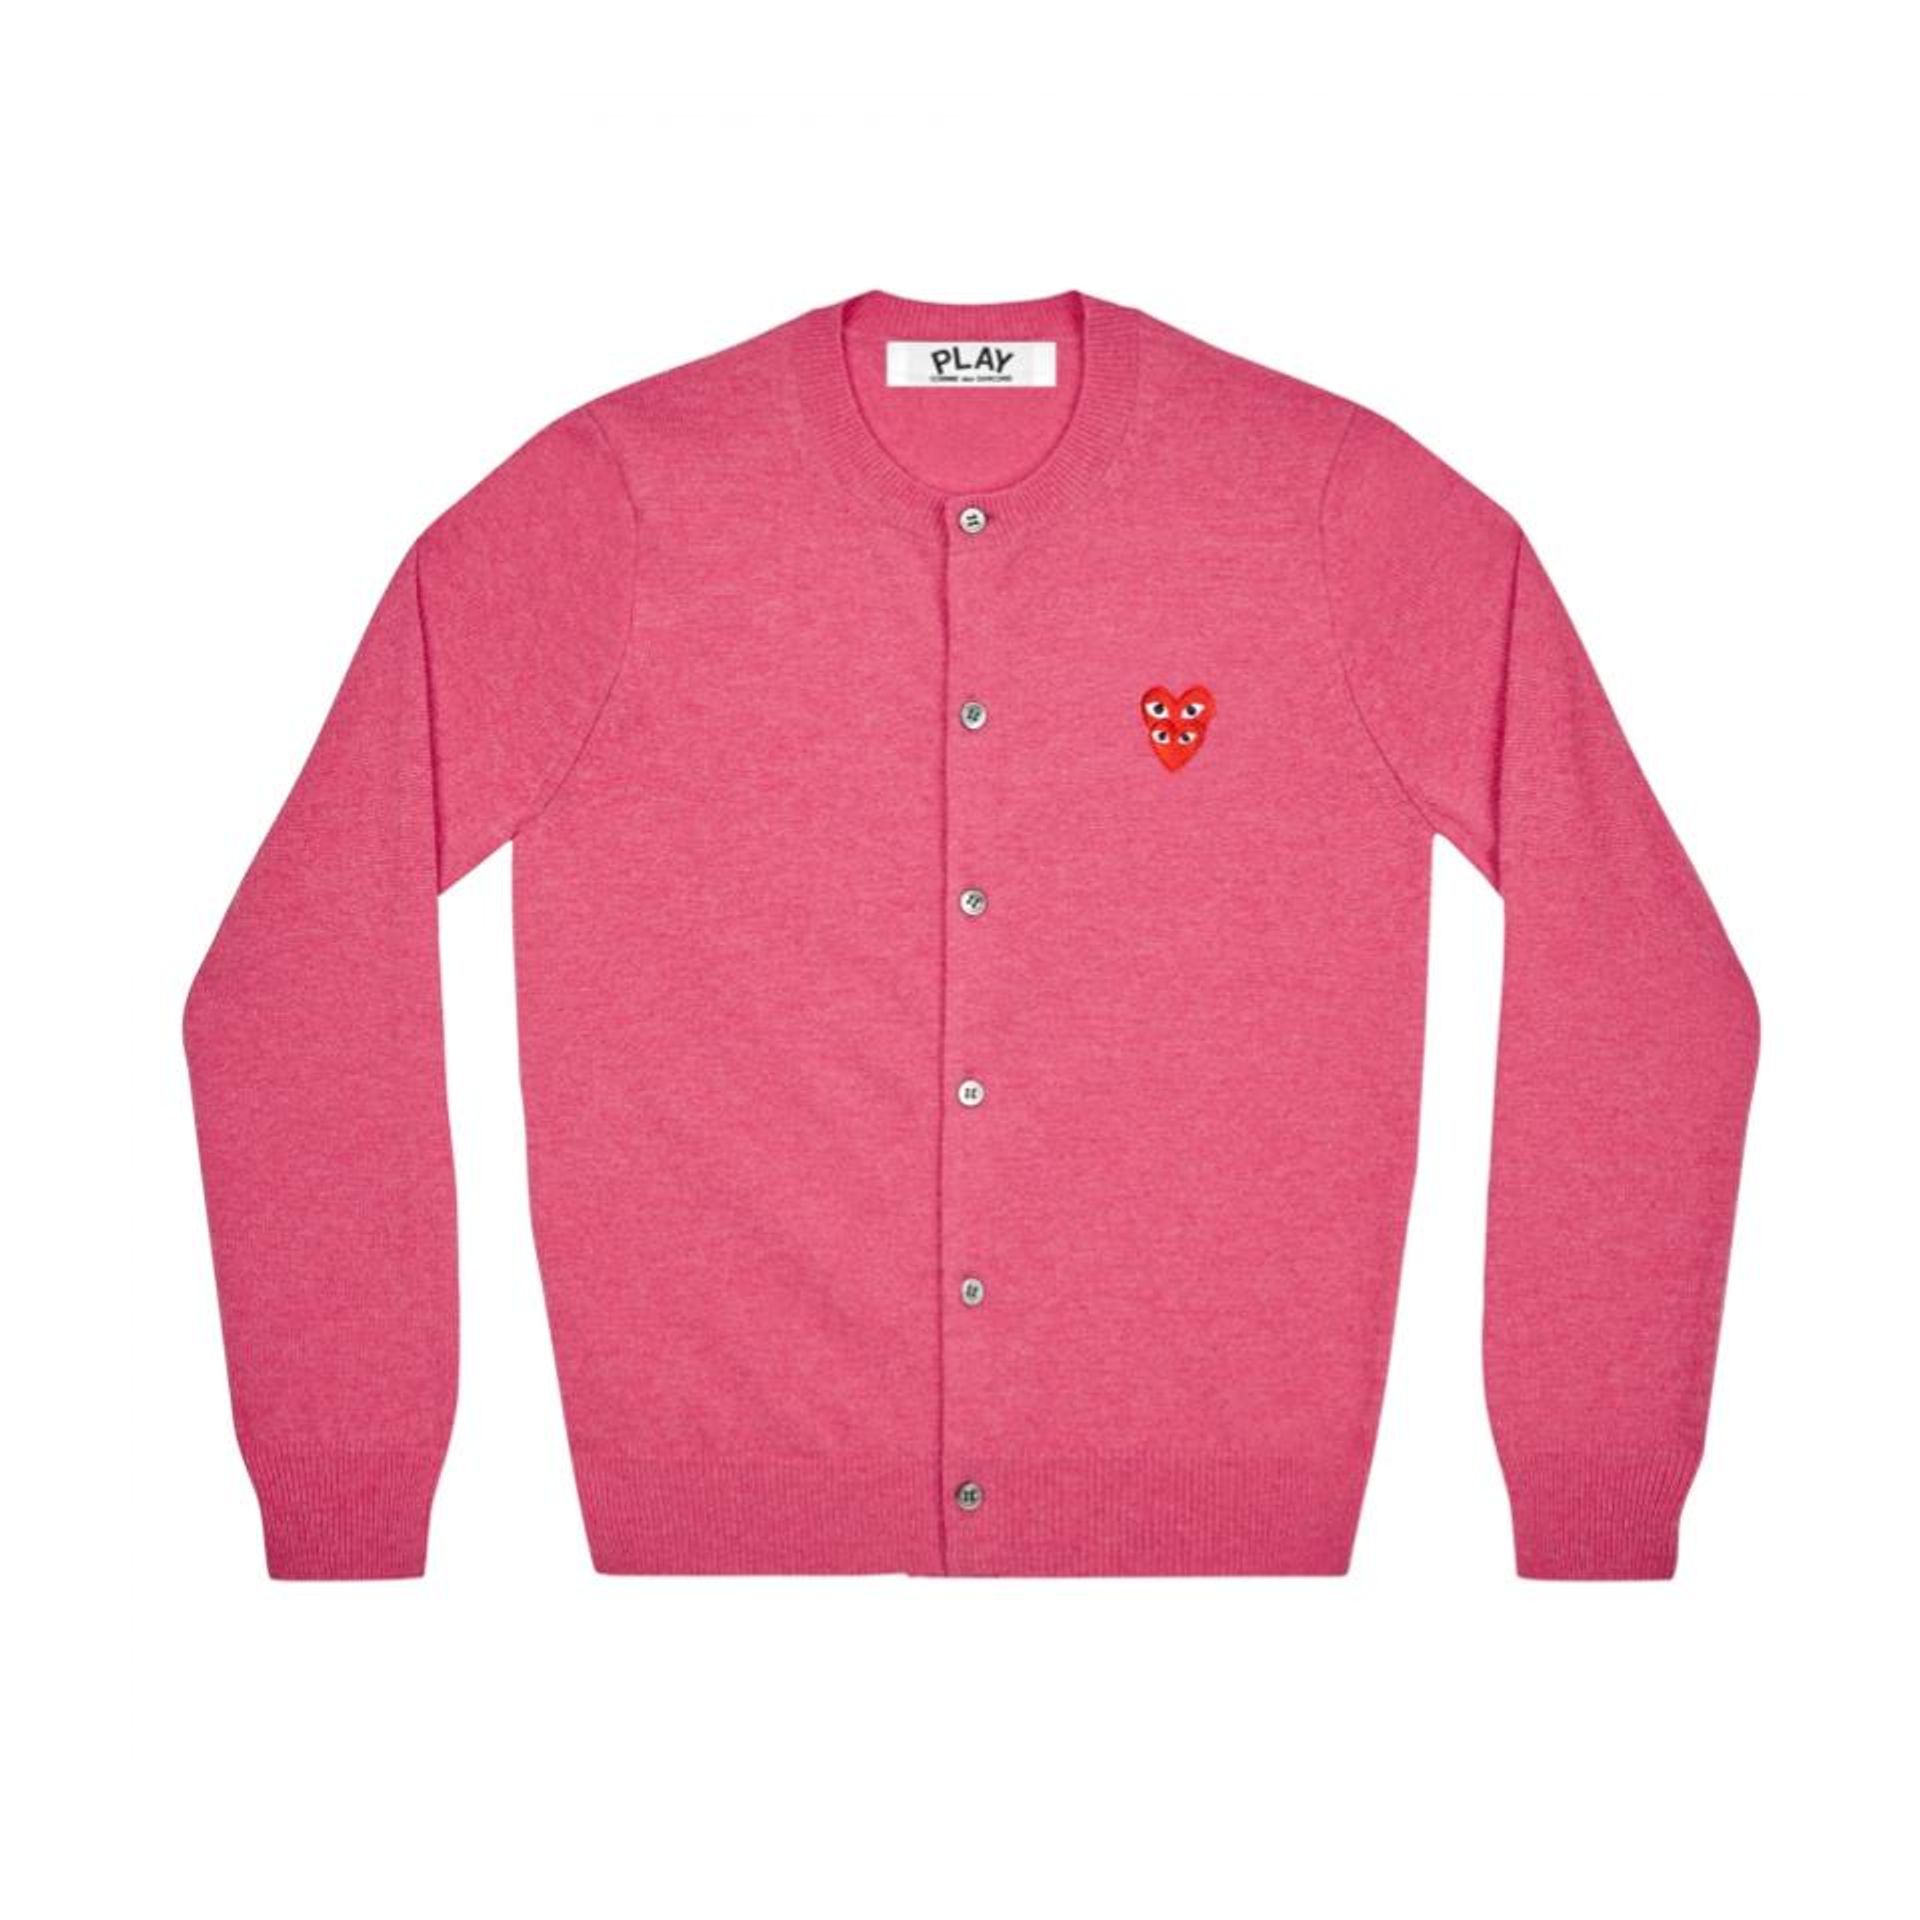 PLAY Comme des Garcons Double Eye Men's Cardigan Pink